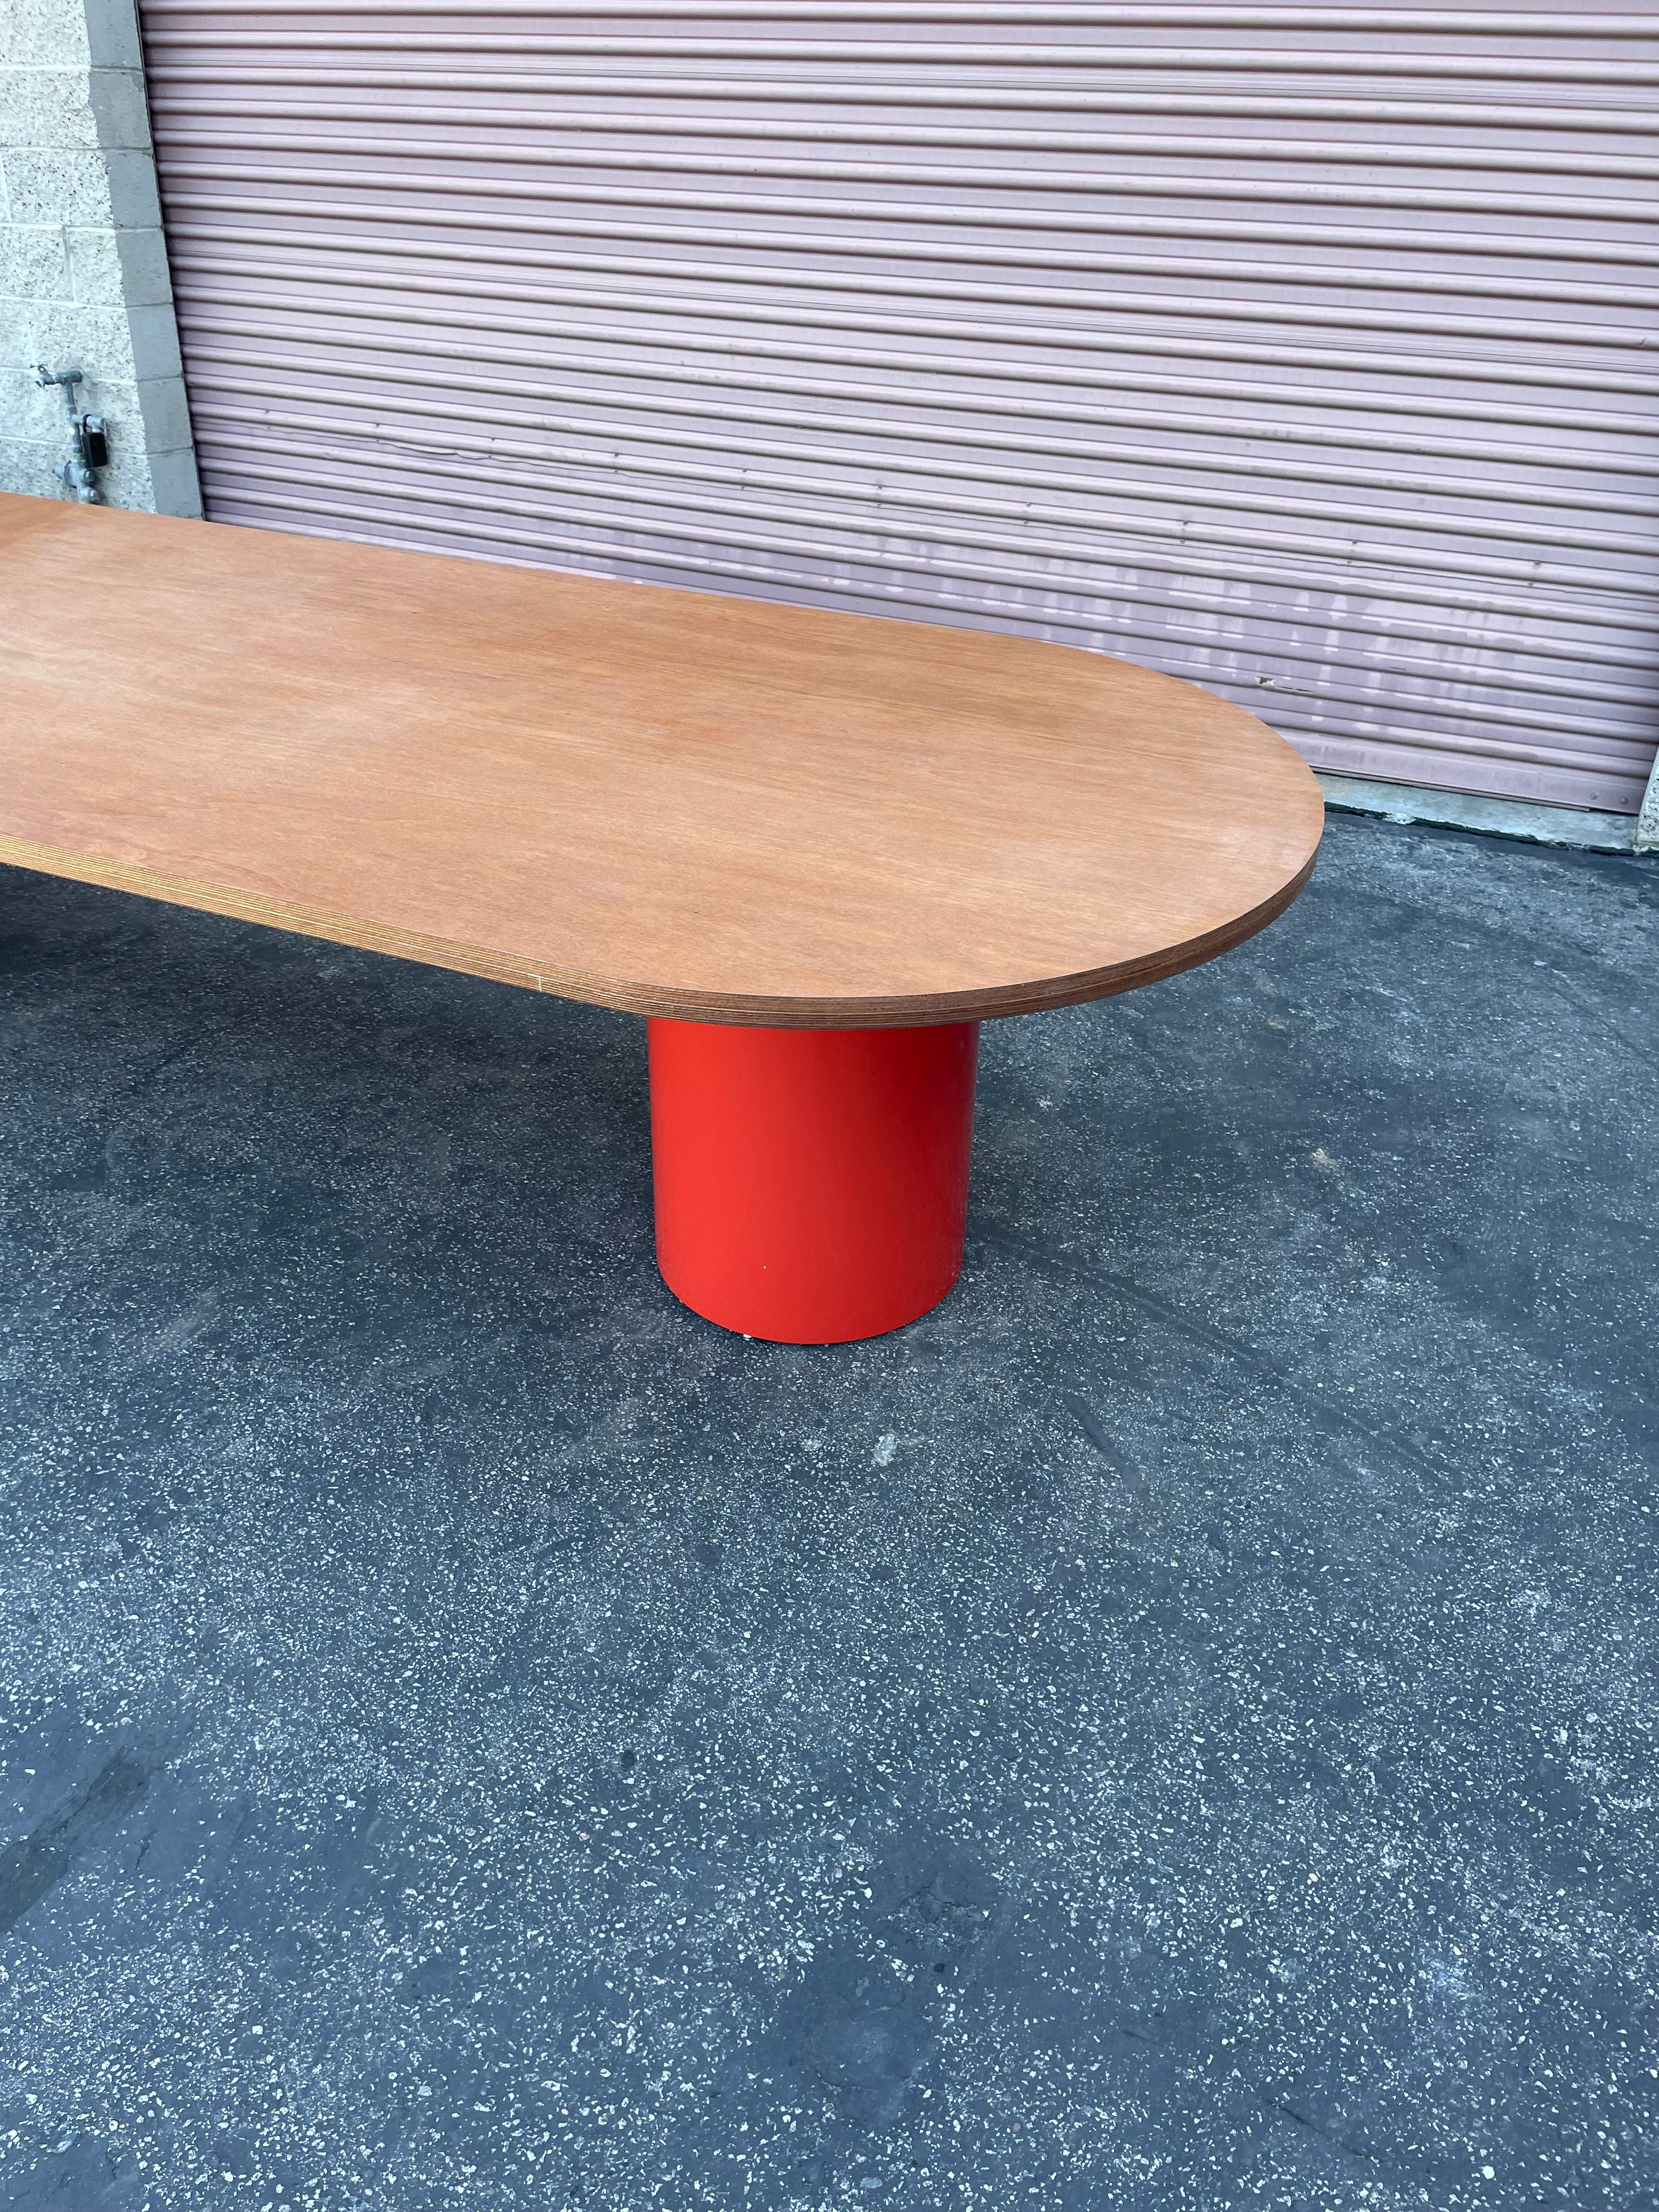  Outdoor Community Tables product image 5